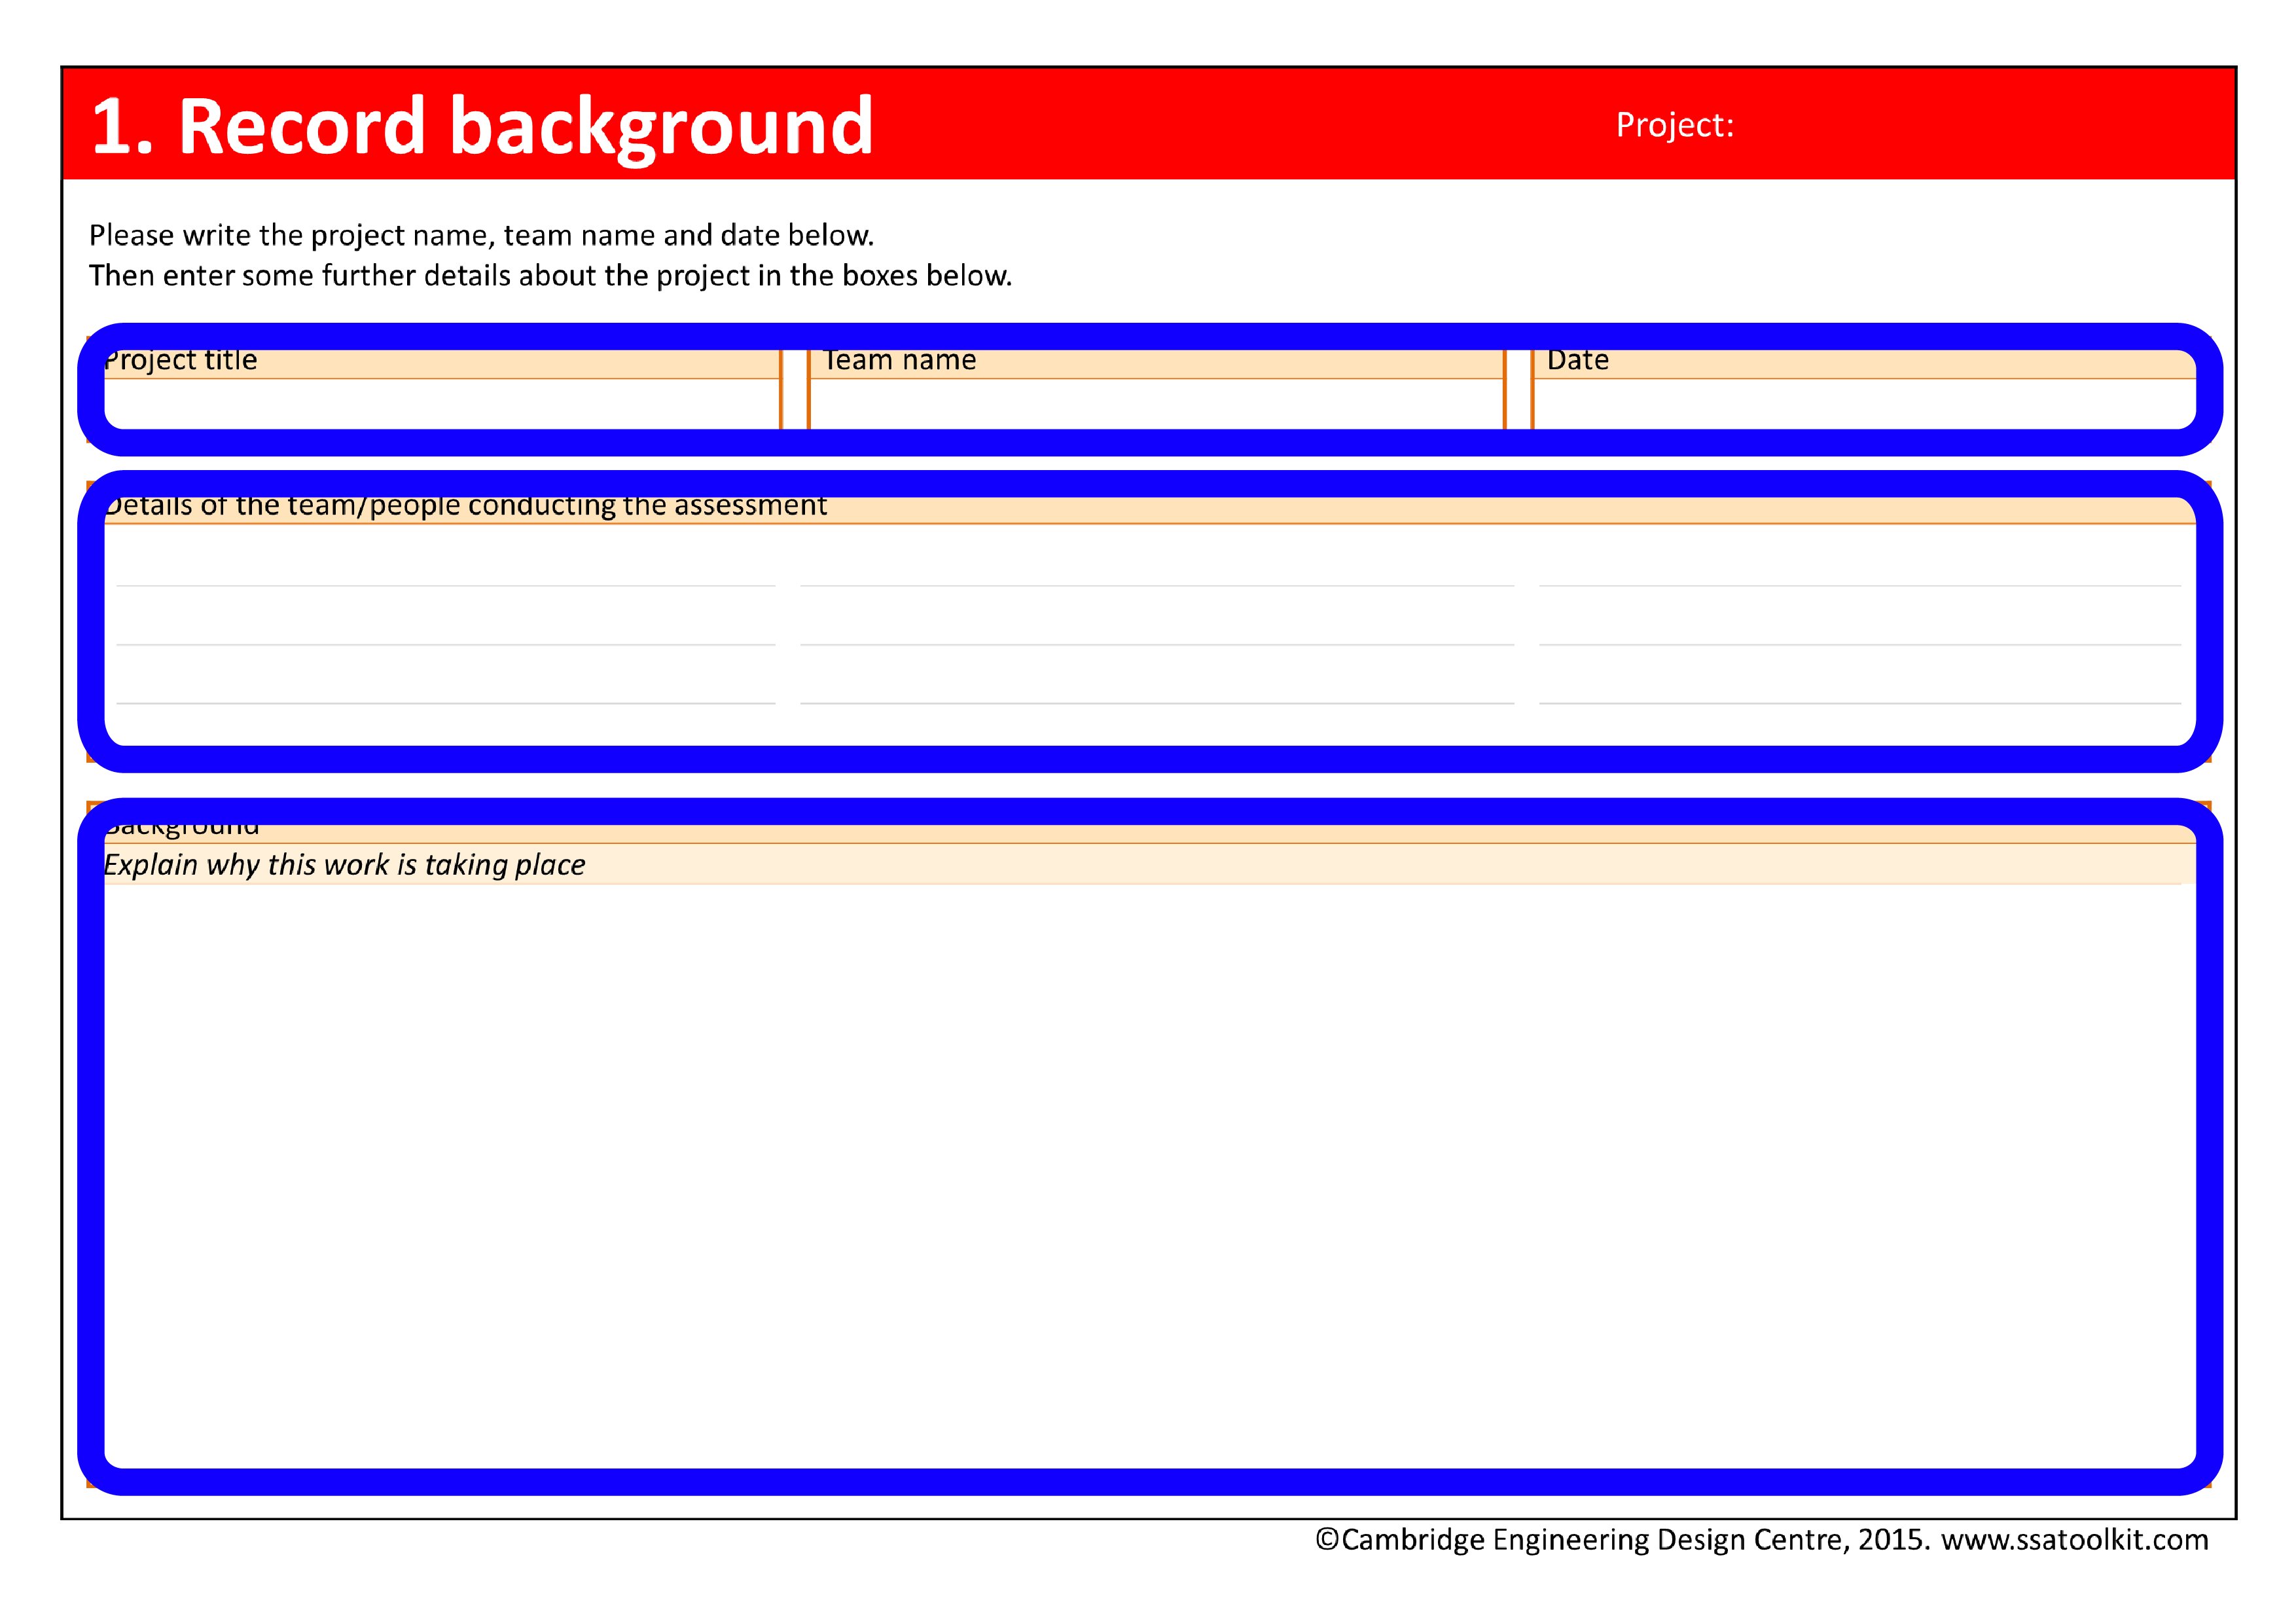 Screenshot of Record background page of the assessment form